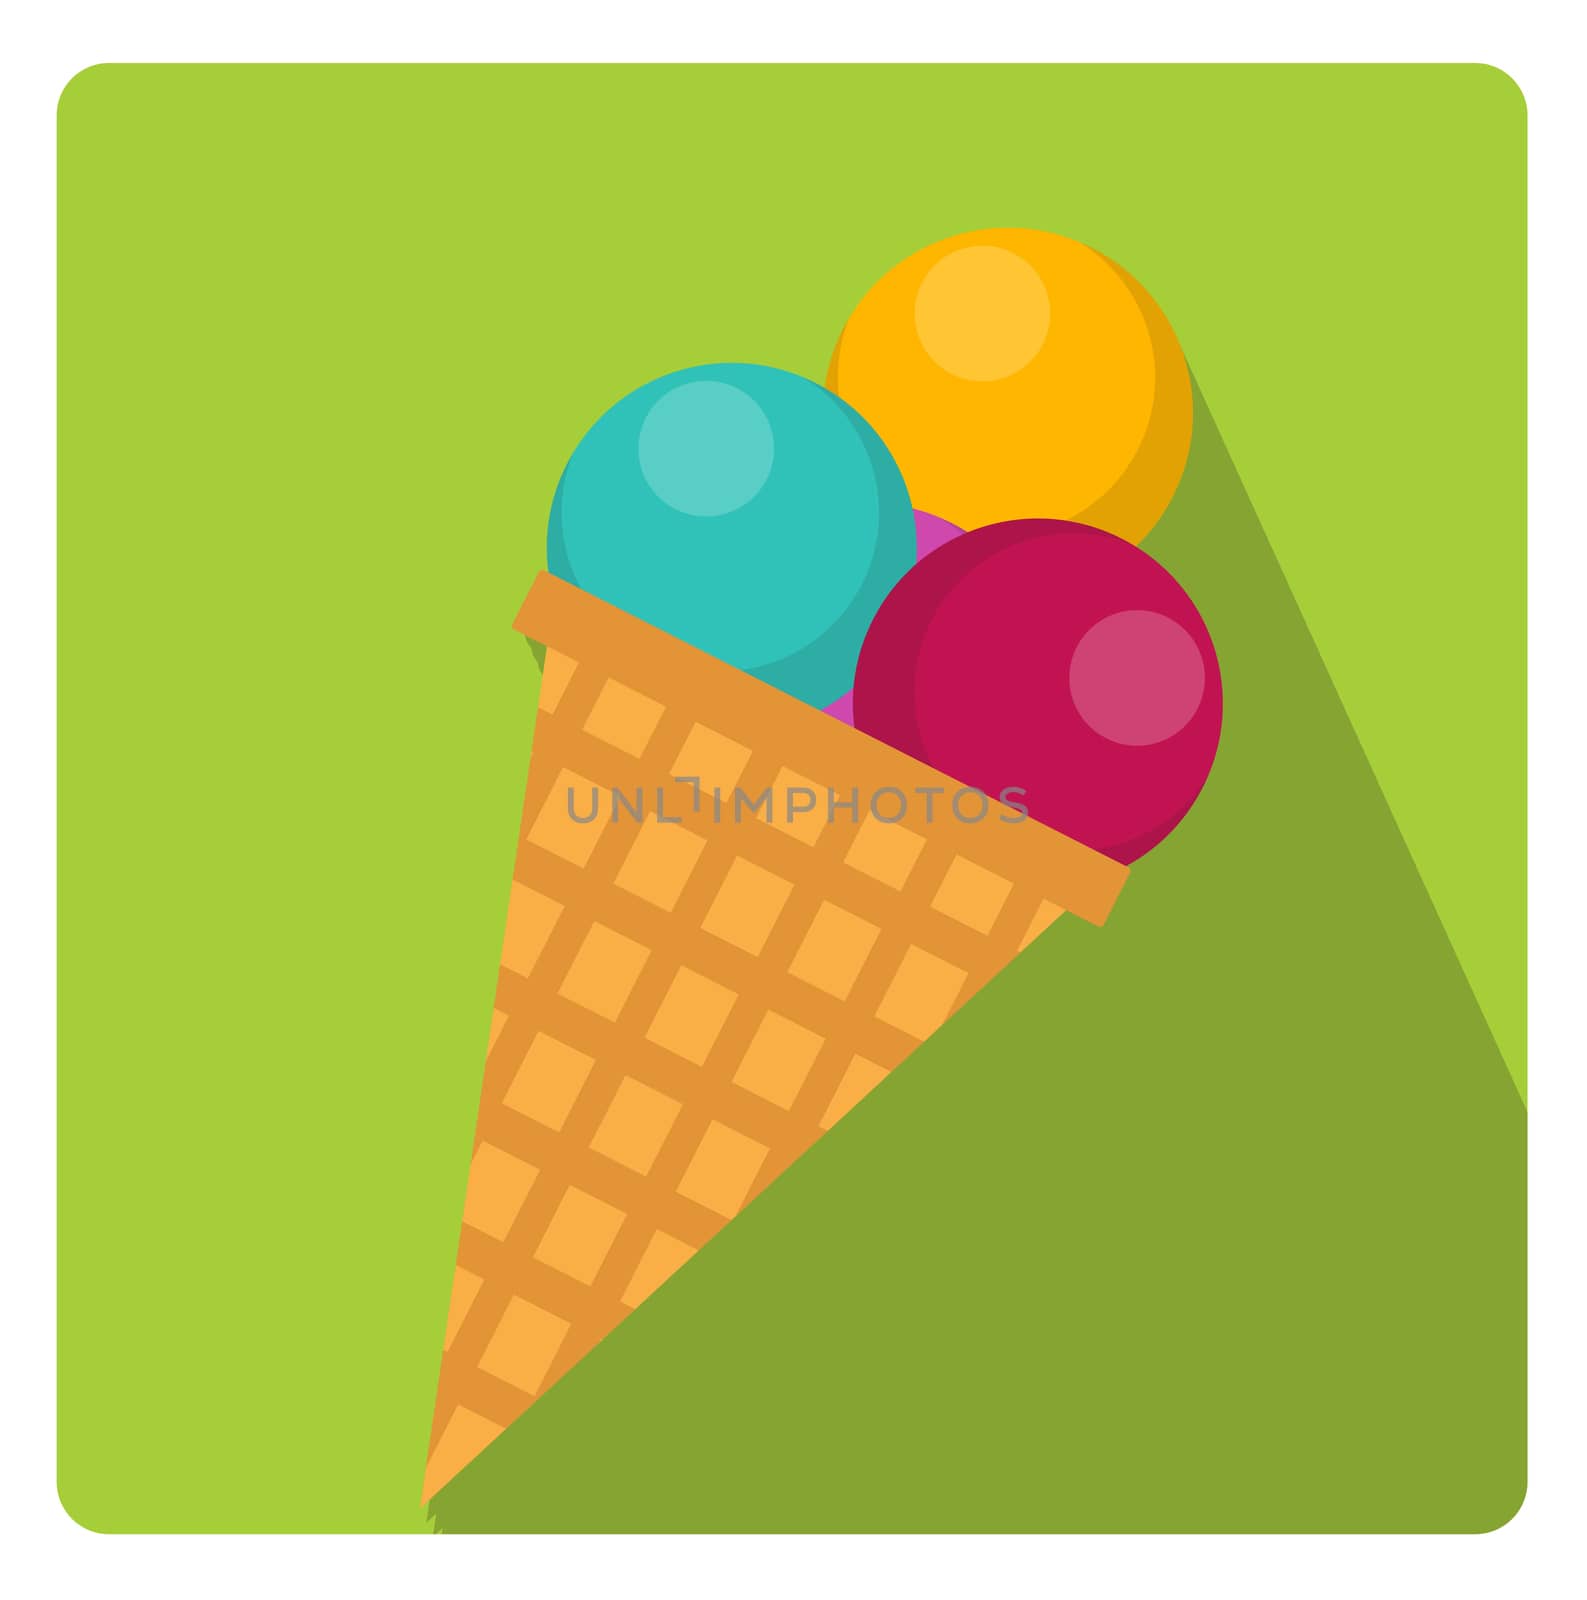 Ice cream cone icon flat style with long shadows, isolated on white background. illustration. by lucia_fox